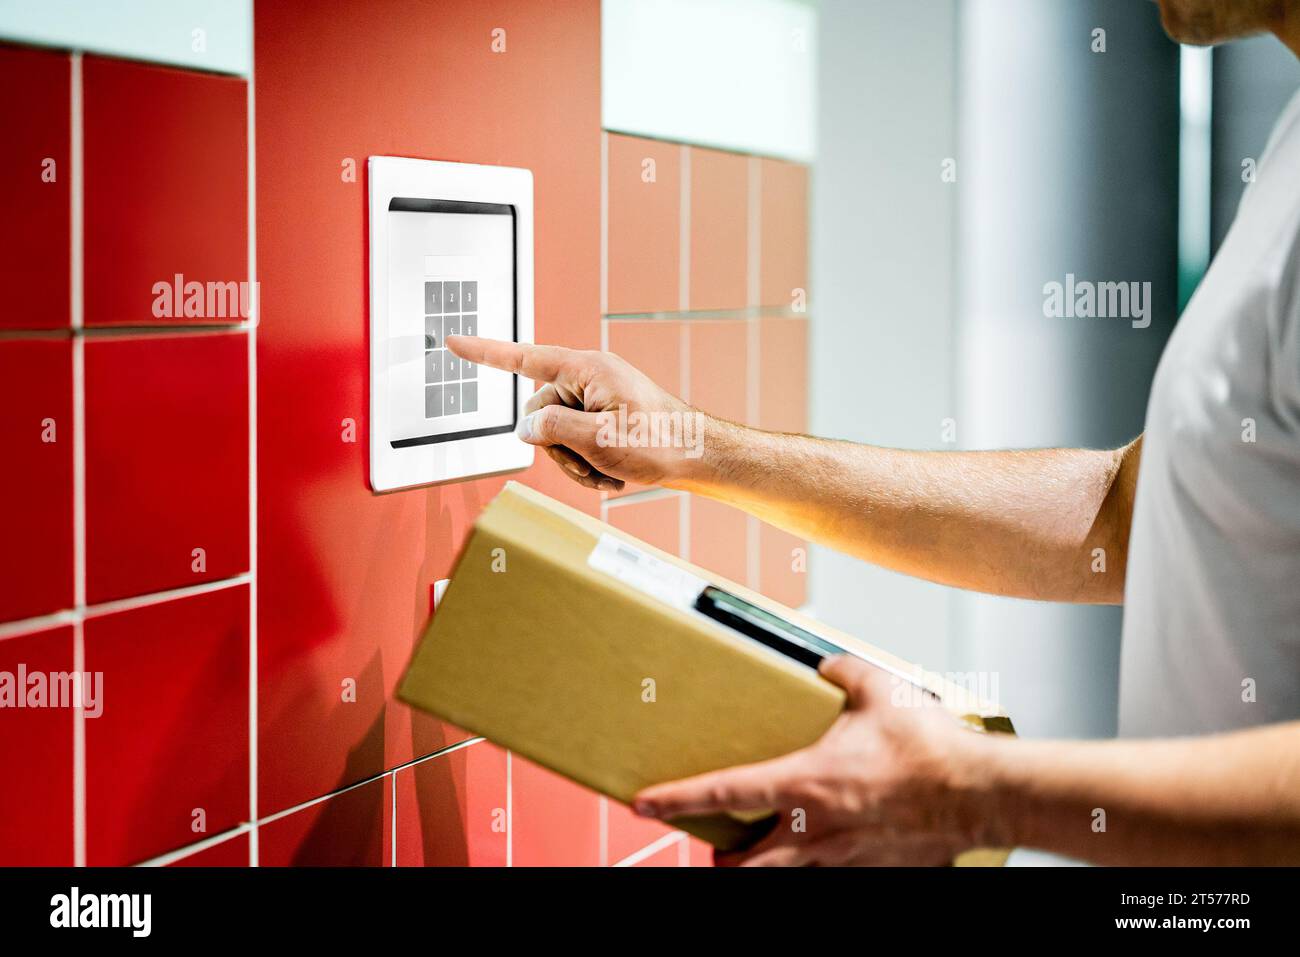 Package locker machine. Parcel service. Box and mobile phone. Man using code to collect delivery. Shipment terminal at post office. Stock Photo